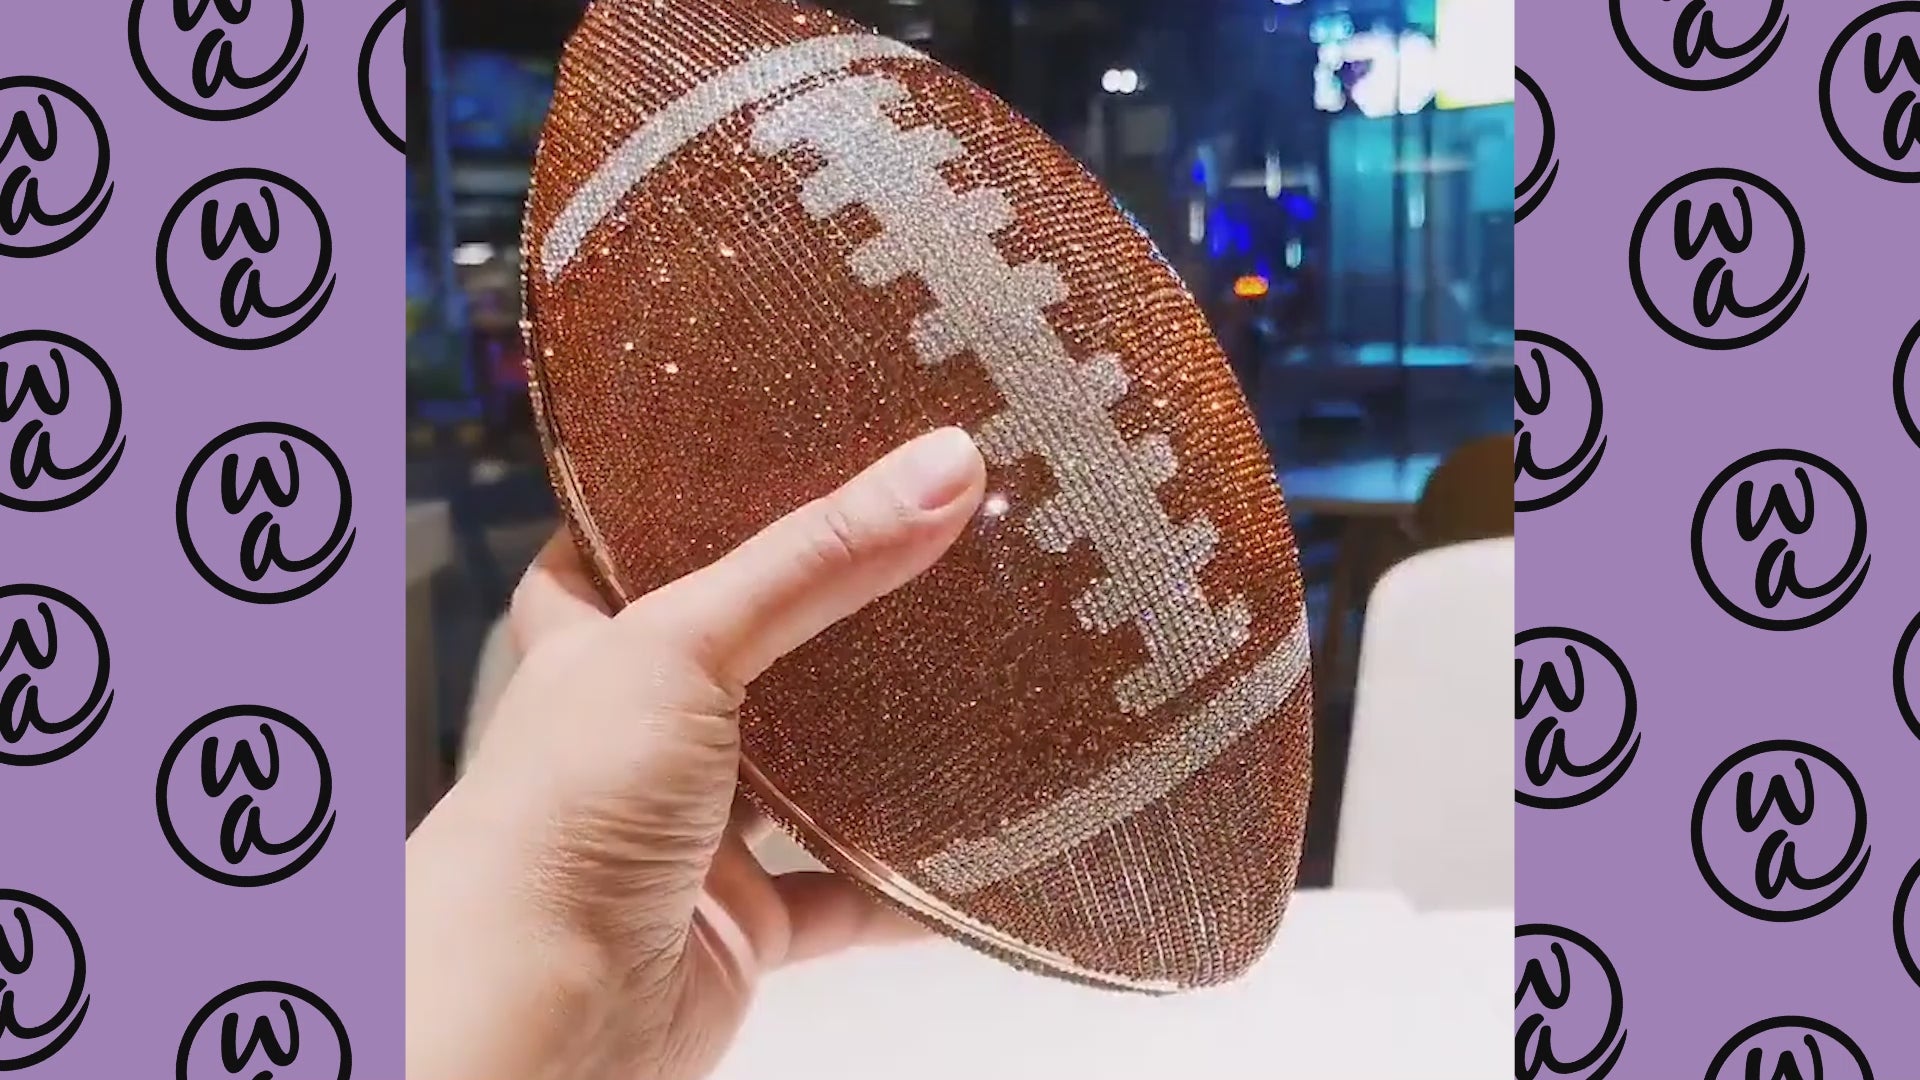 Is this gem-encrusted football the Super Bowl 2019 of bags?